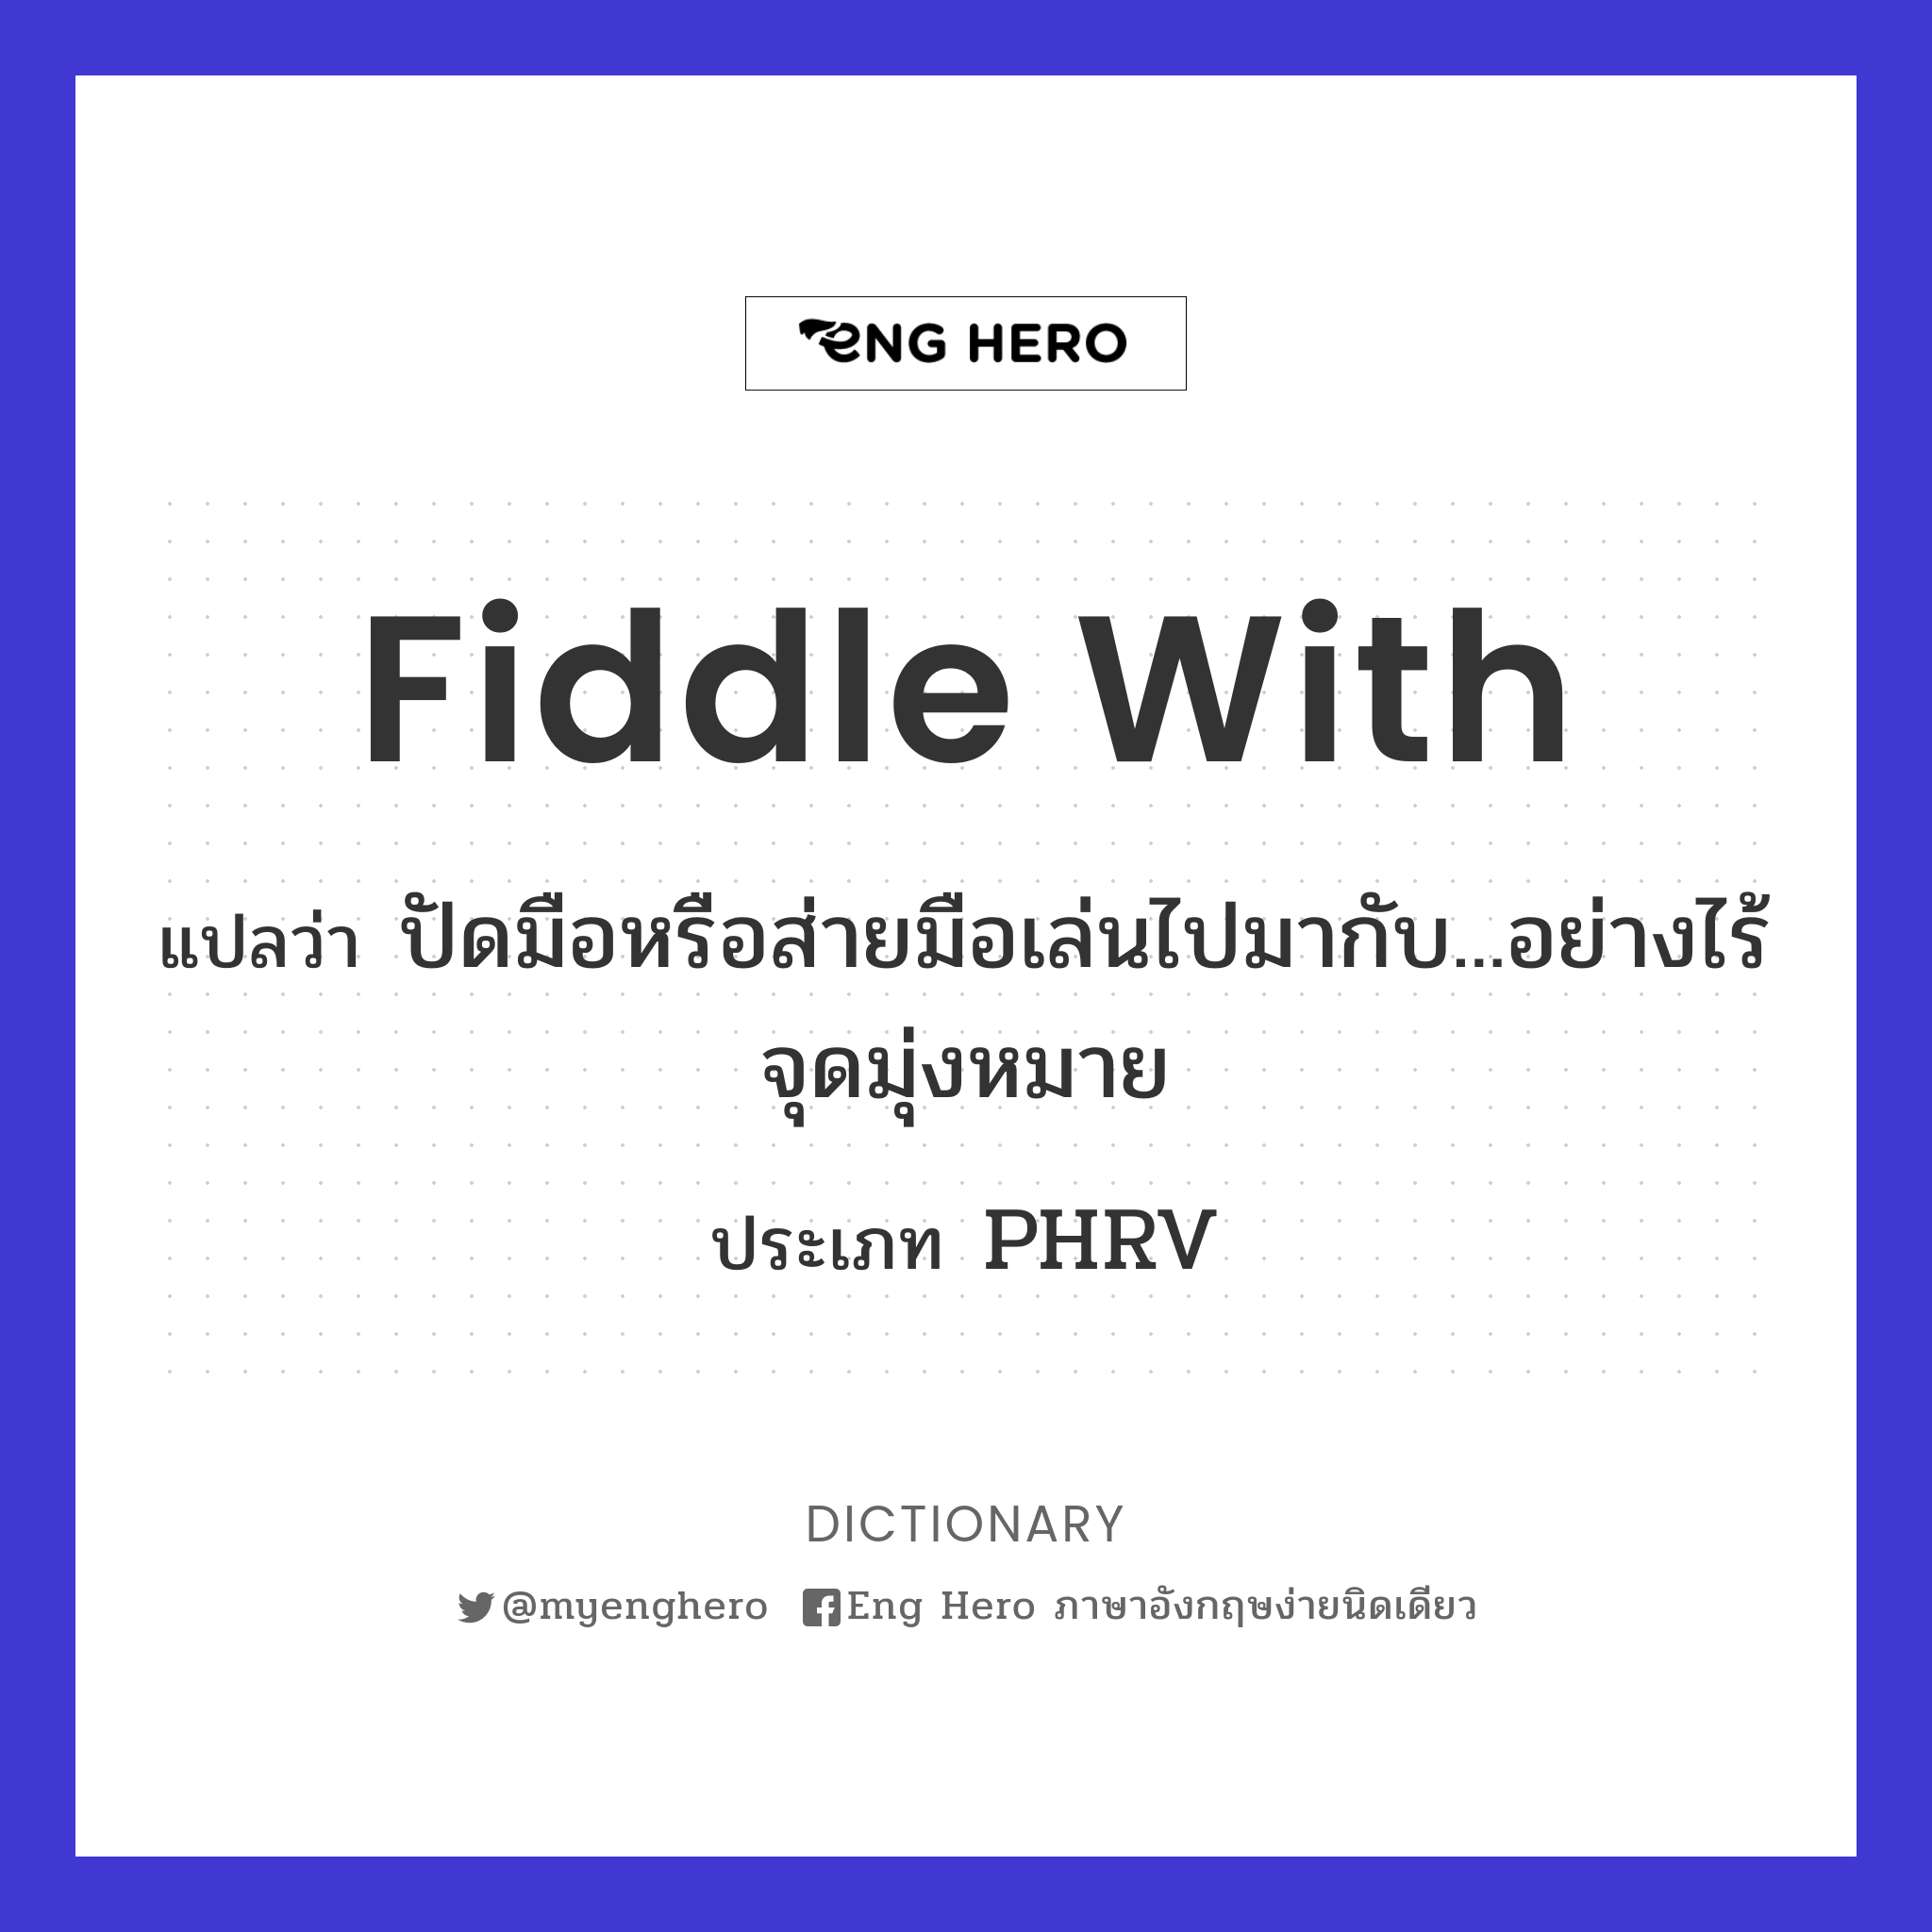 fiddle with